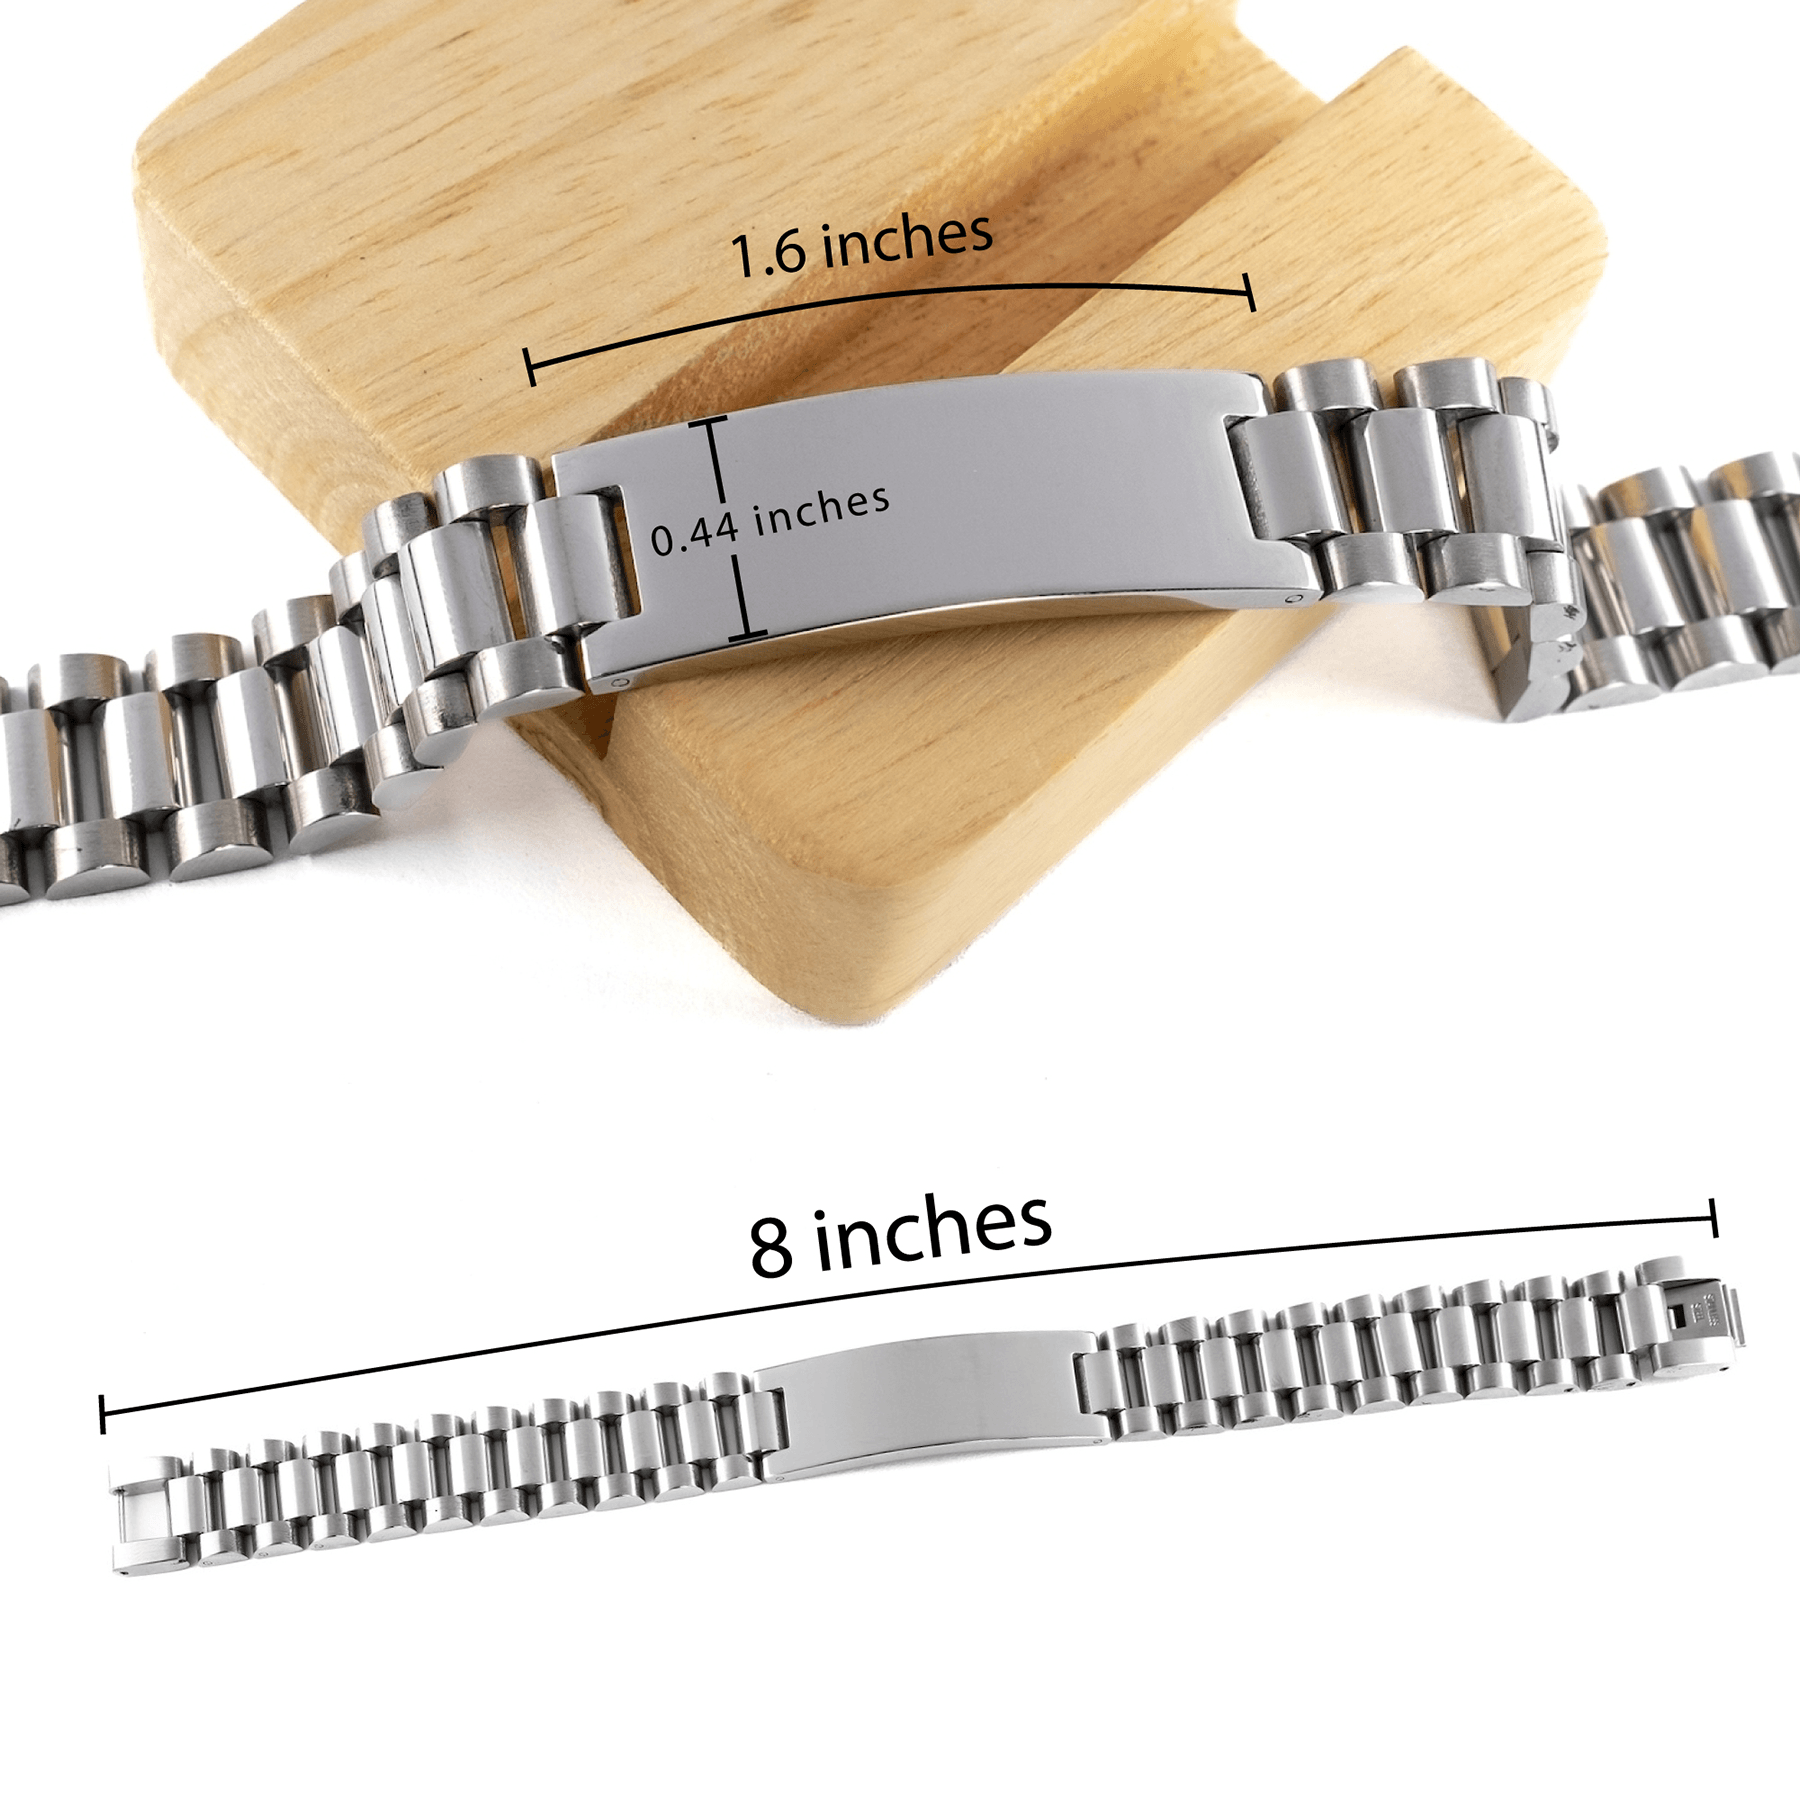 Remarkable Model Gifts, Your dedication and hard work, Inspirational Birthday Christmas Unique Ladder Stainless Steel Bracelet For Model, Coworkers, Men, Women, Friends - Mallard Moon Gift Shop